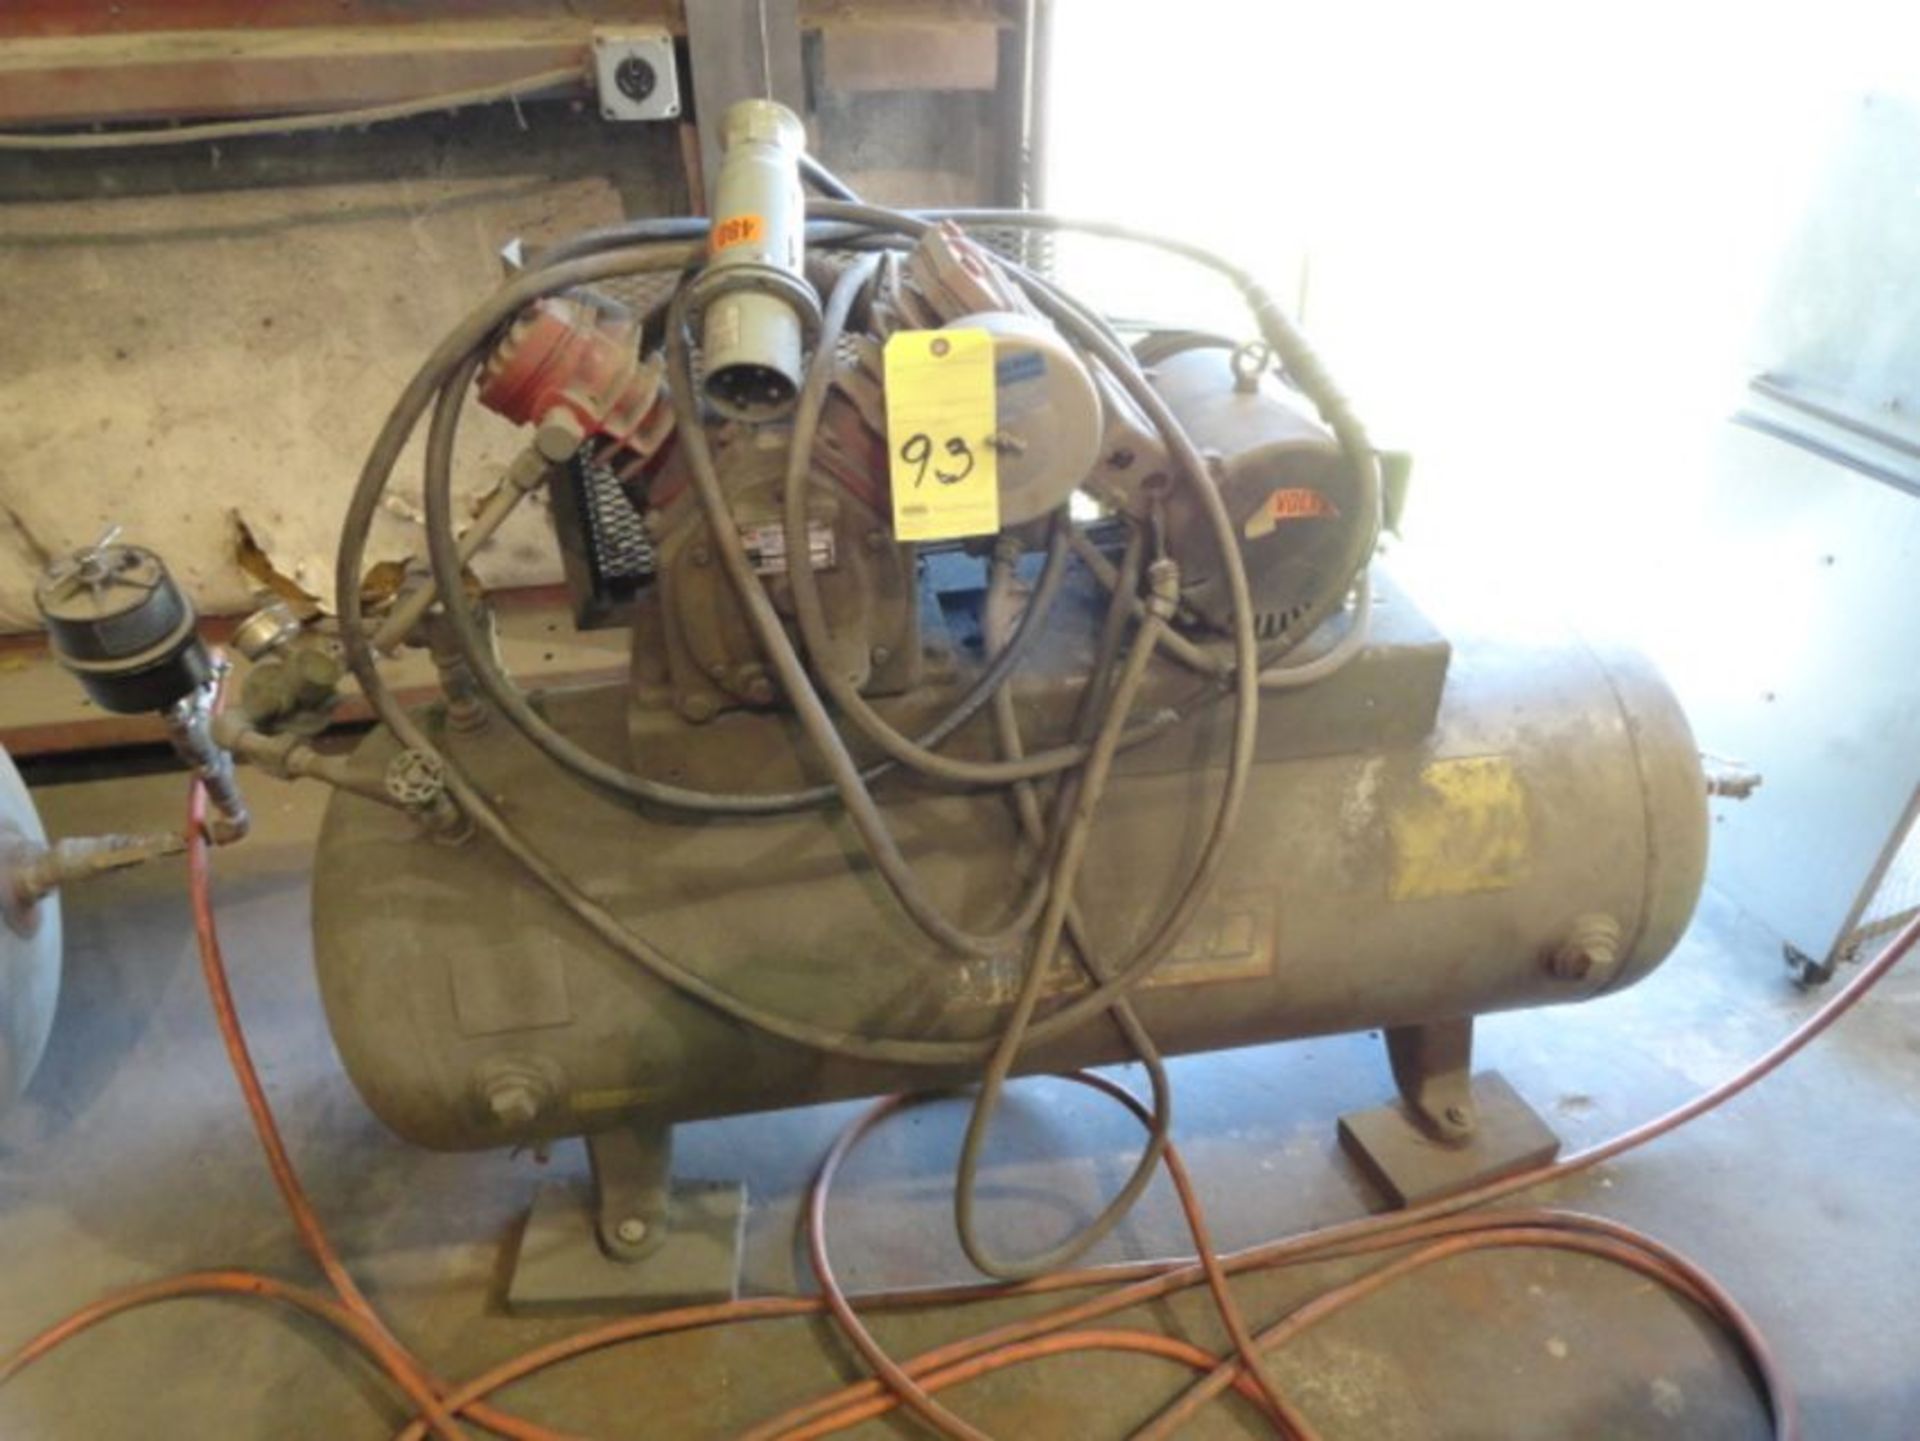 AIR COMPRESSOR, INGERSOLL RAND MDL. 242, Type 30, 5 HP motor, 2-cyl., 60 gal tank, 230/460 v. A/C, - Image 2 of 2